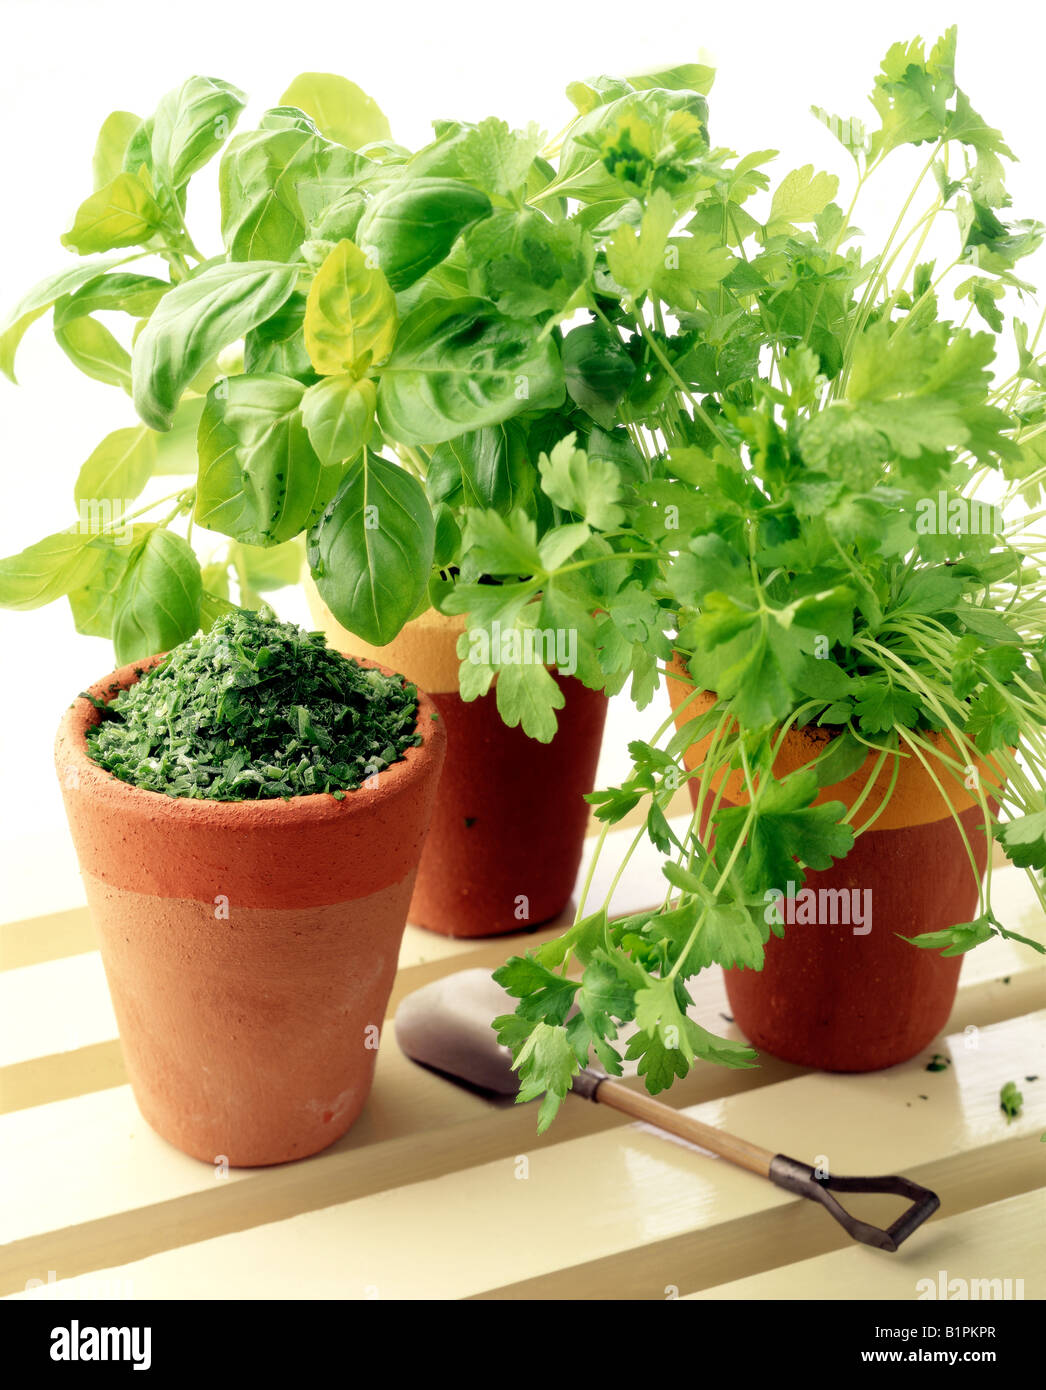 basil and flat leaf parsley herbs and freeze dried herbs Stock Photo